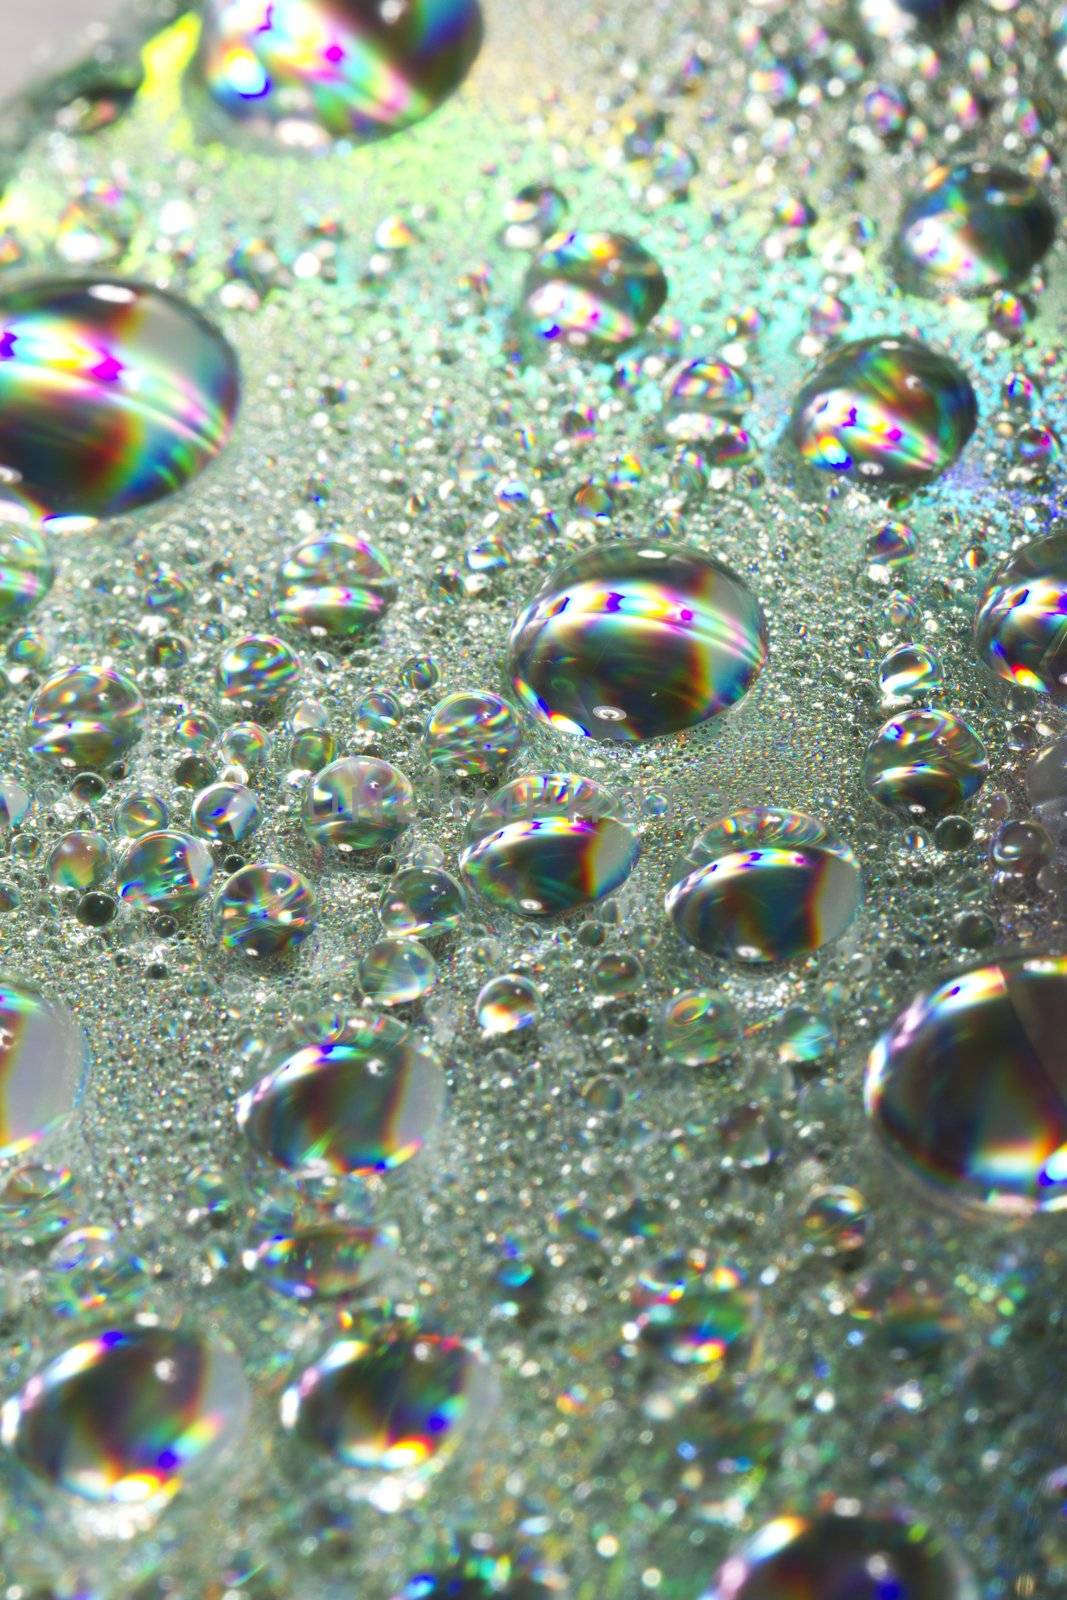 Close up view of many colorful and bright drops of water on a shiny surface.